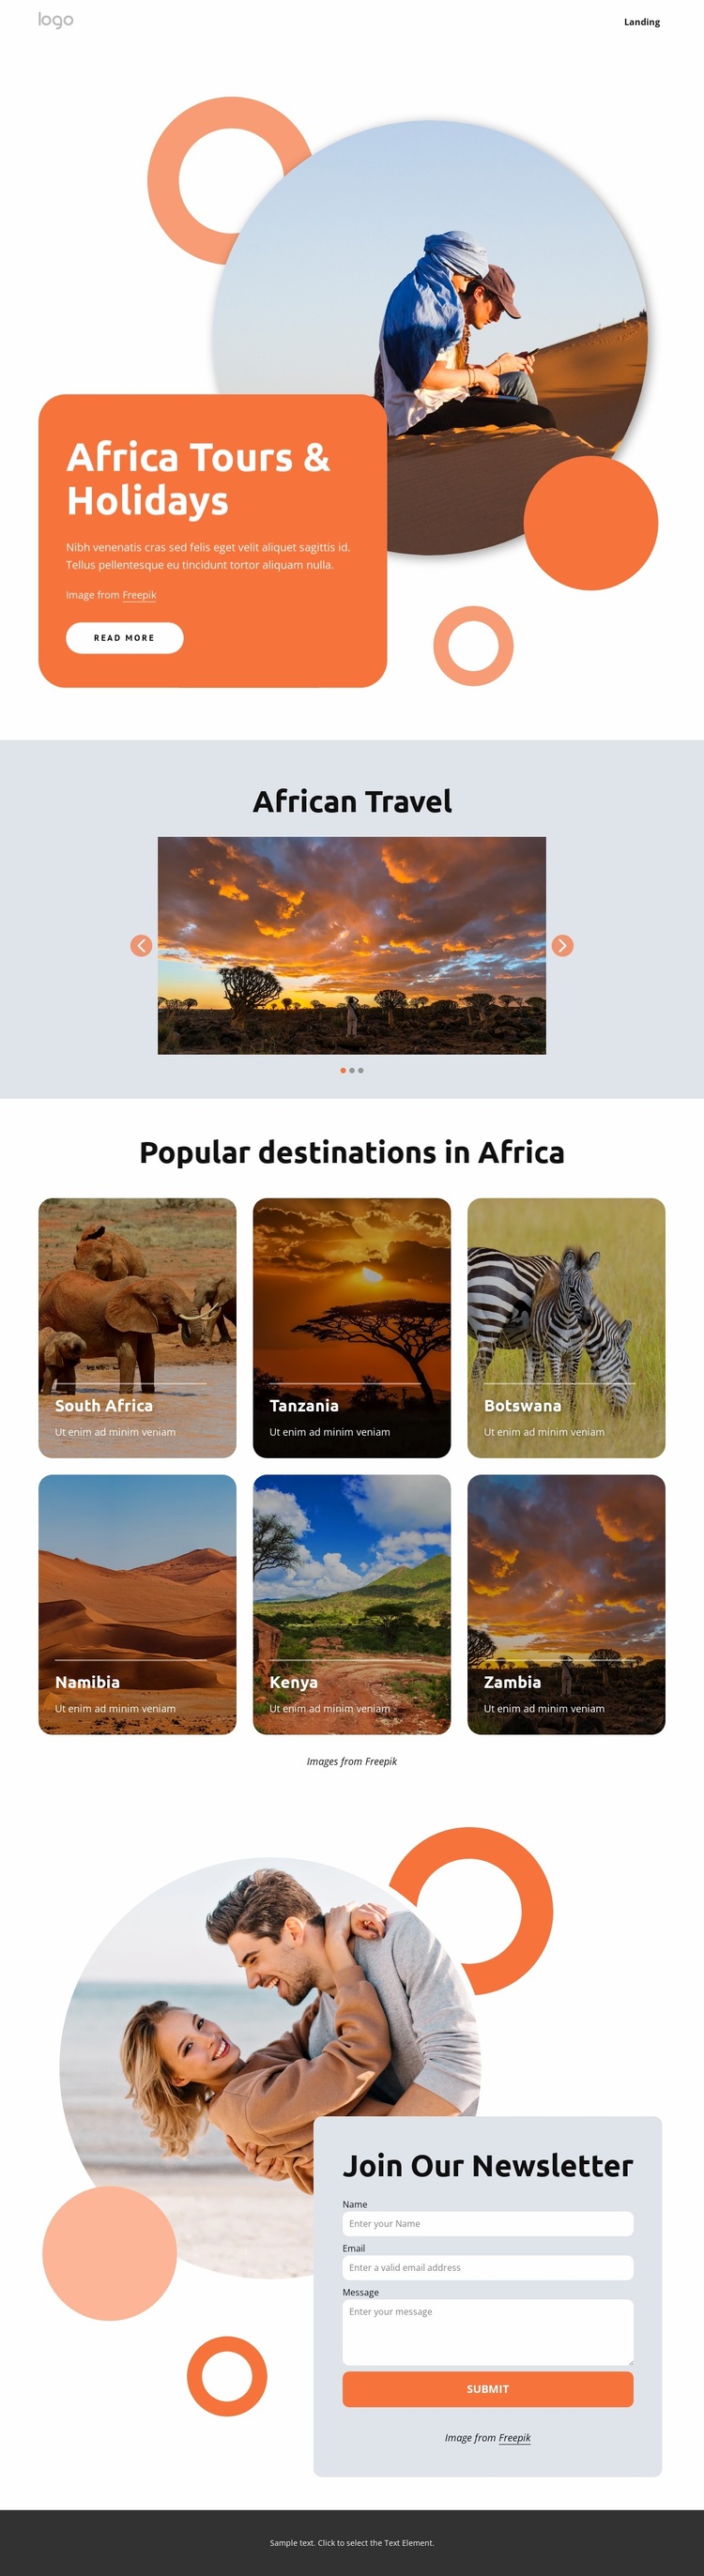 Hand-crafted African holidays Website Design